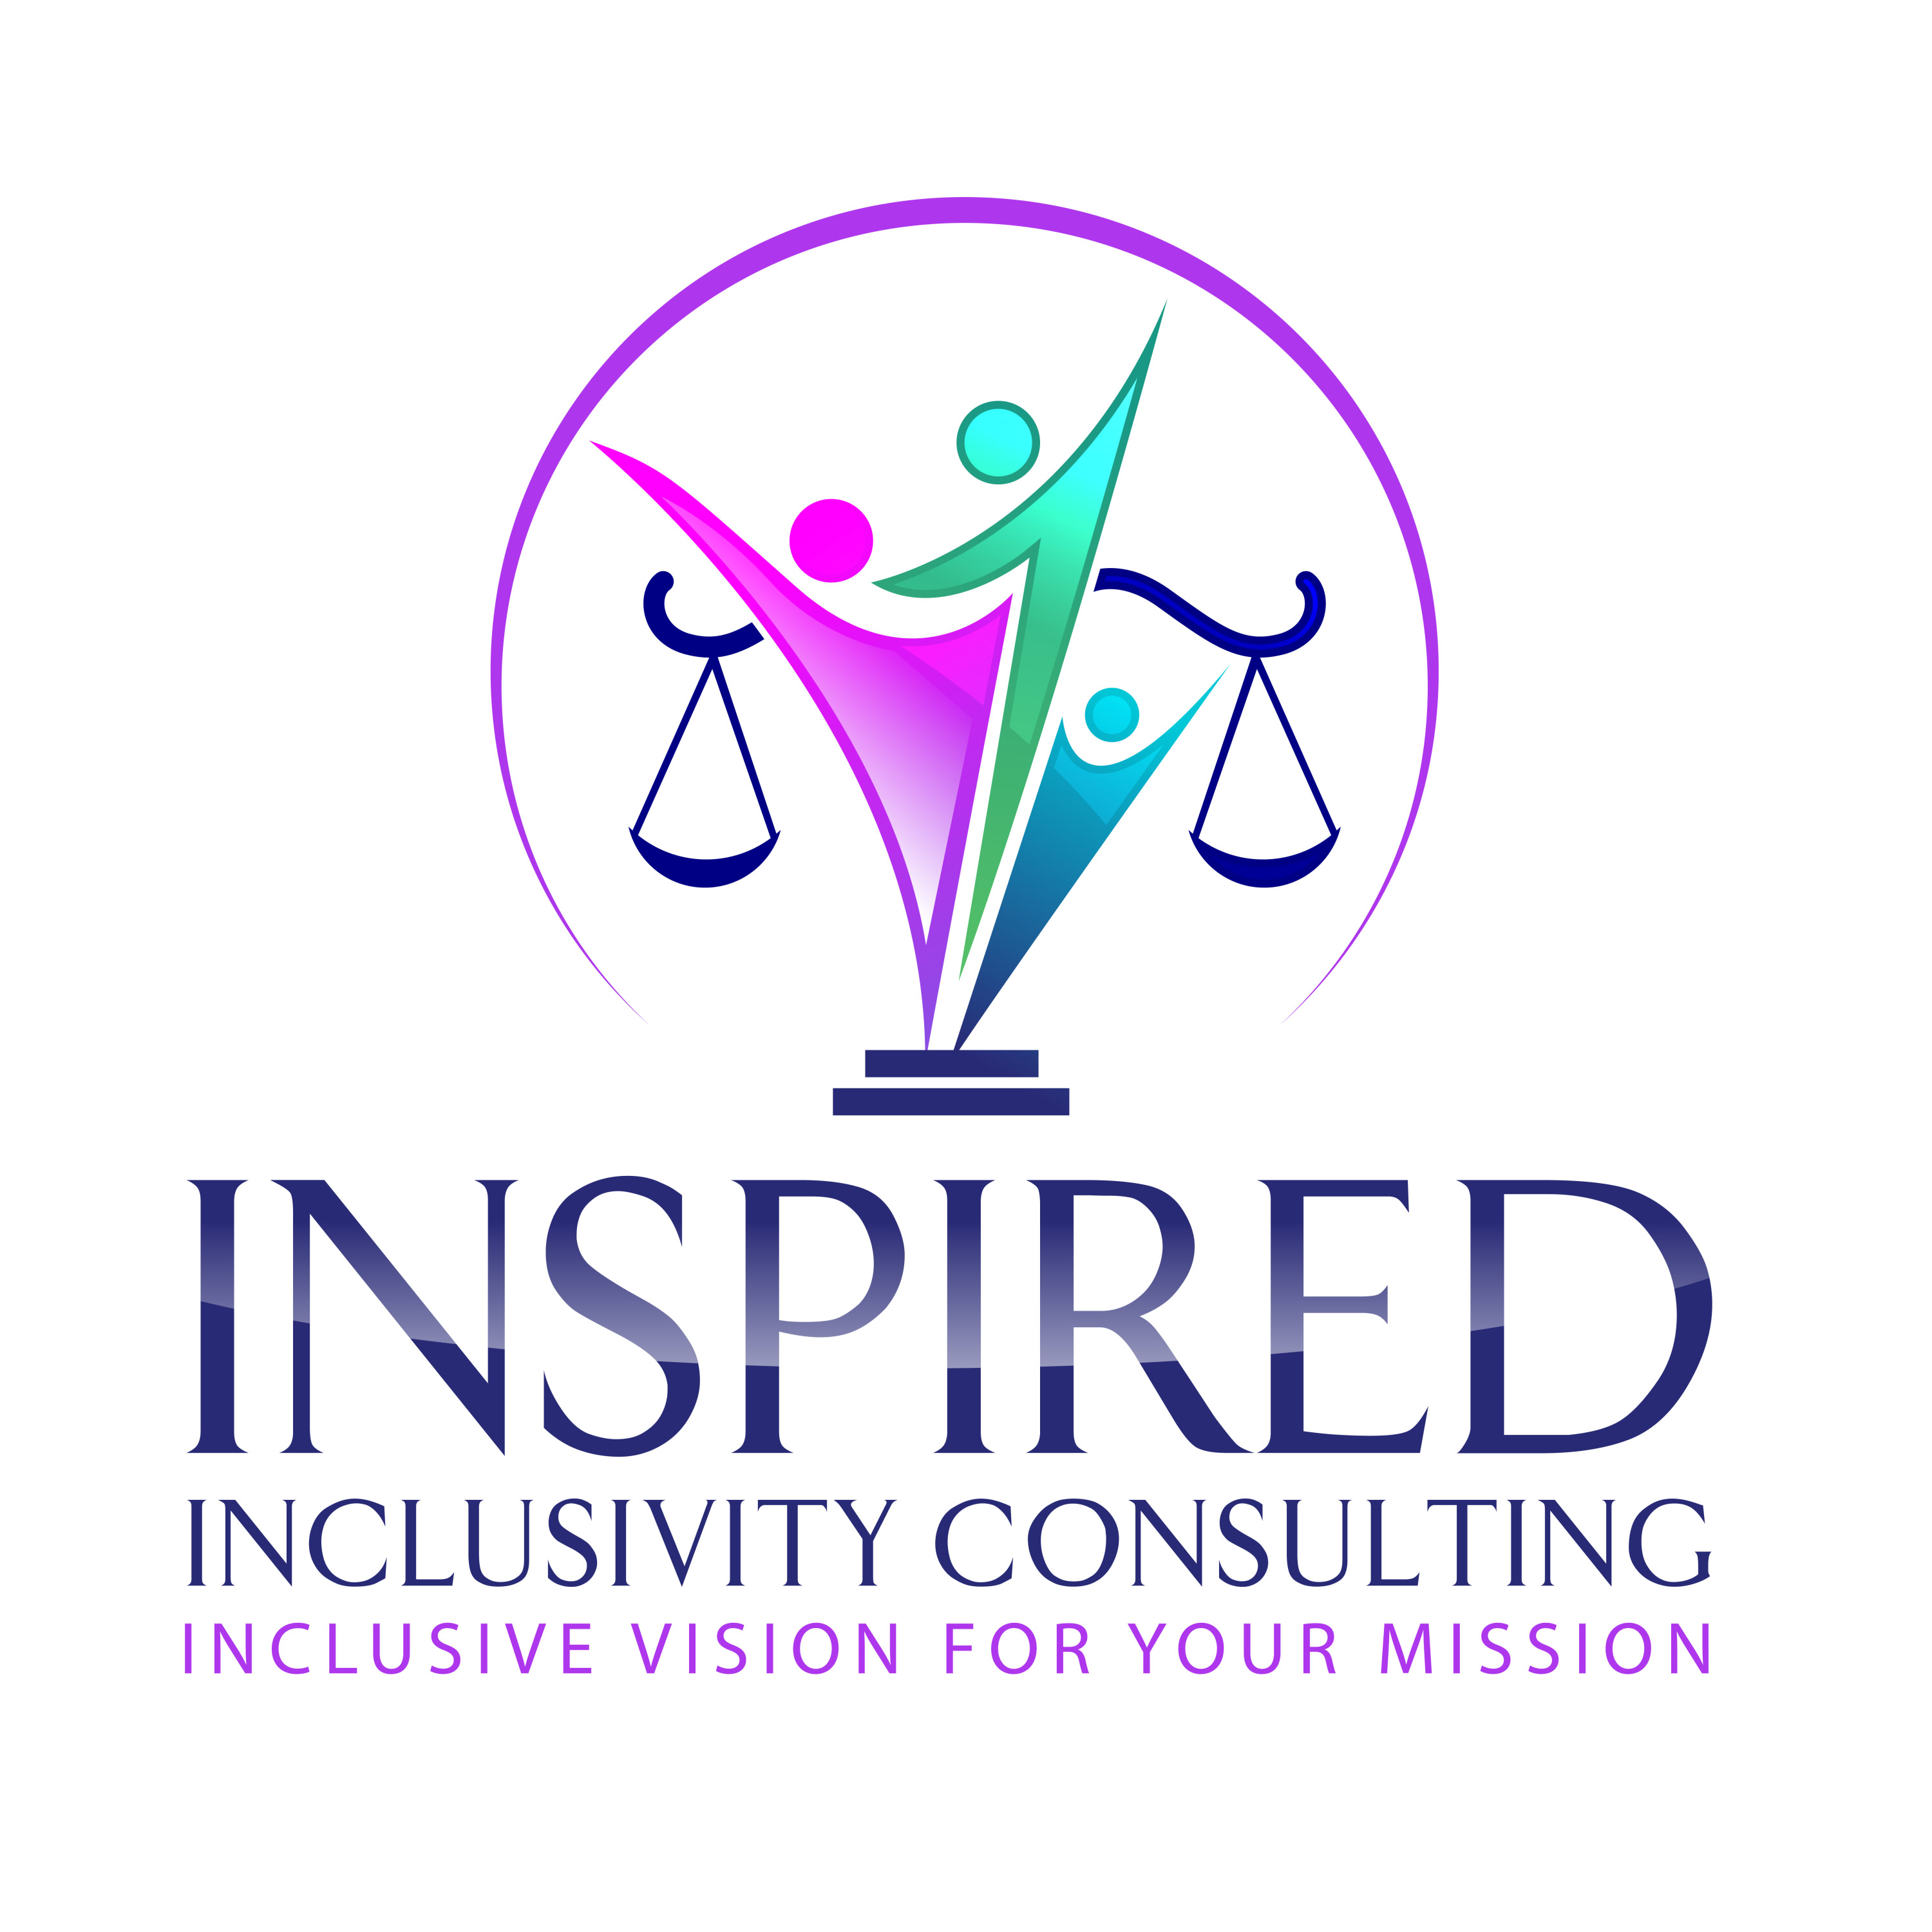 Logo: purple circle over 3 figures as a legal scale. Text: Inspired Inclusivity Consulting Inclusive Vision for your Mission